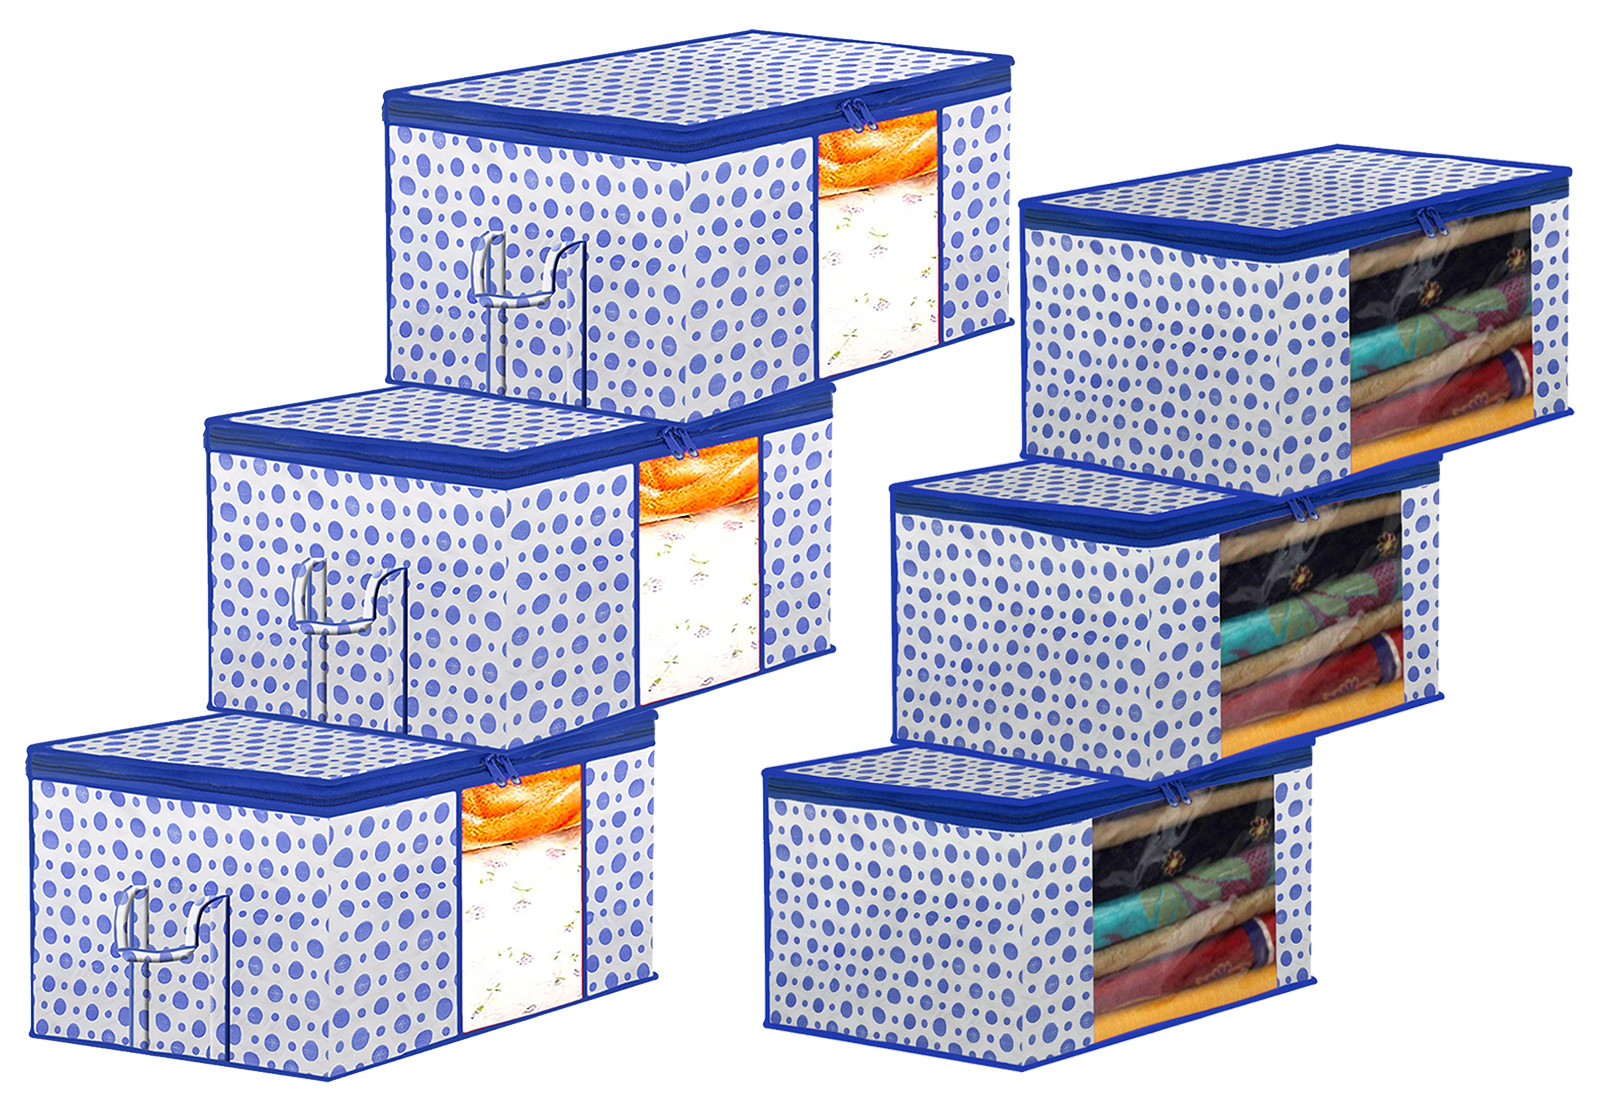 Kuber Industries Dot Printed Multiuses Non-Woven  Saree Cover &  Underbed Storage Bag/Organizer Set With Tranasparent Window,(Blue)-46KM0617